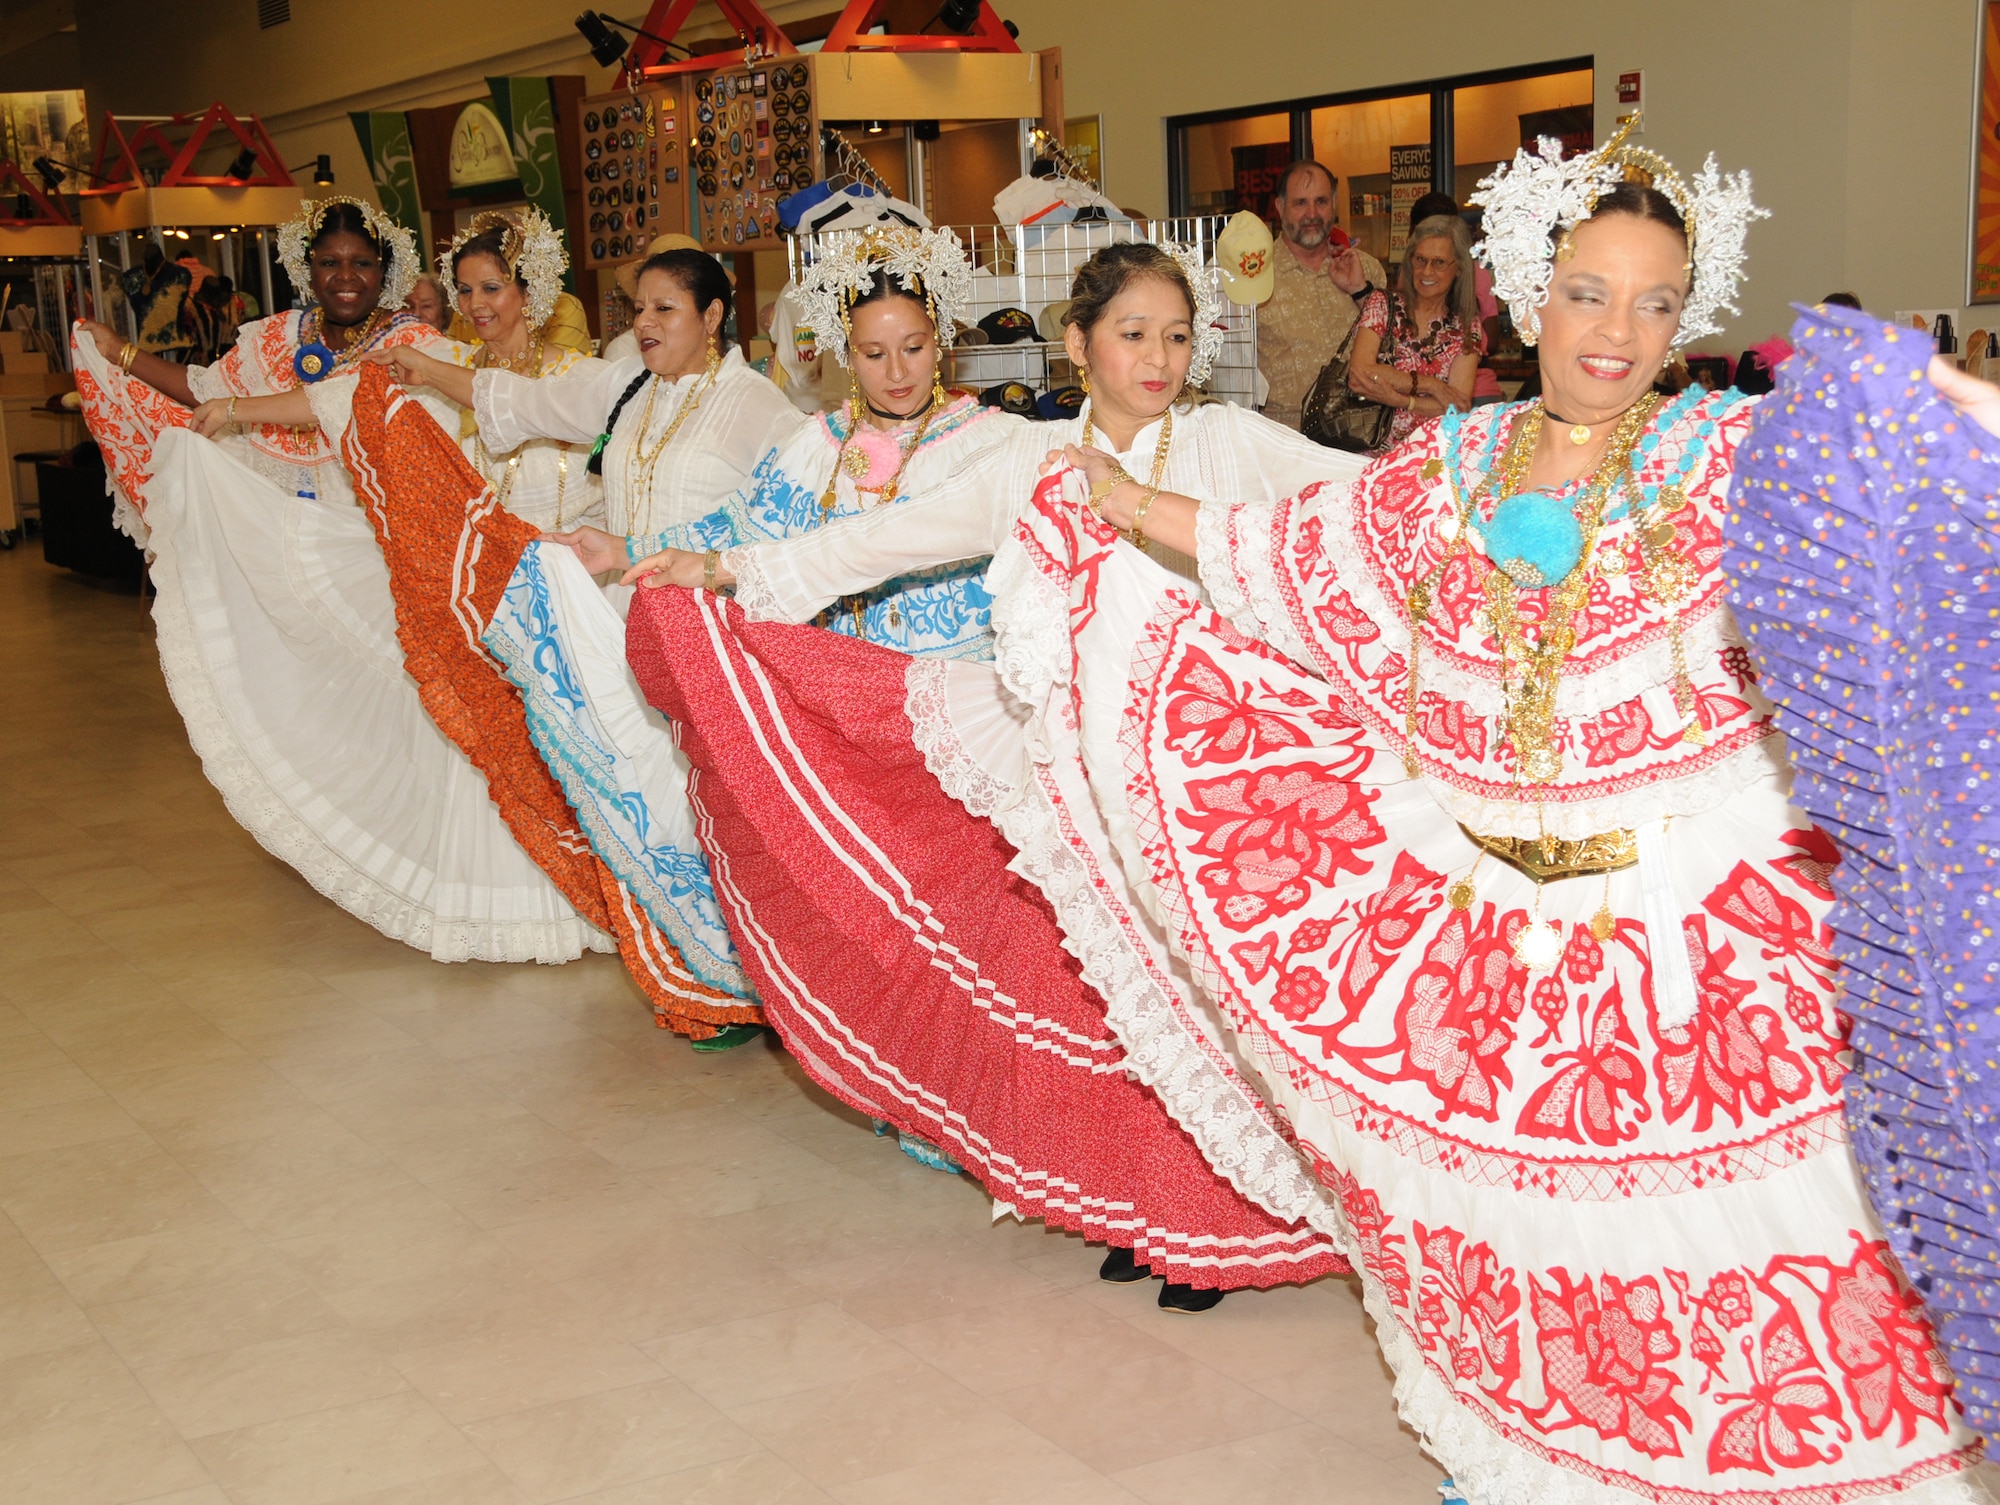 “Grupo Folklorico Panama Sin Fronteras” performed Panamanian folk dances Oct. 8 at the main exchange, Keesler Air Force Base, Miss., in honor of Hispanic Heritage Month. The group is comprised of military retirees and spouses in traditional attire called “La Pollera.”  Audience members were paired up with members of the group to celebrate carnival-style to close out the event.  (U.S. Air Force photo by Kemberly Groue)